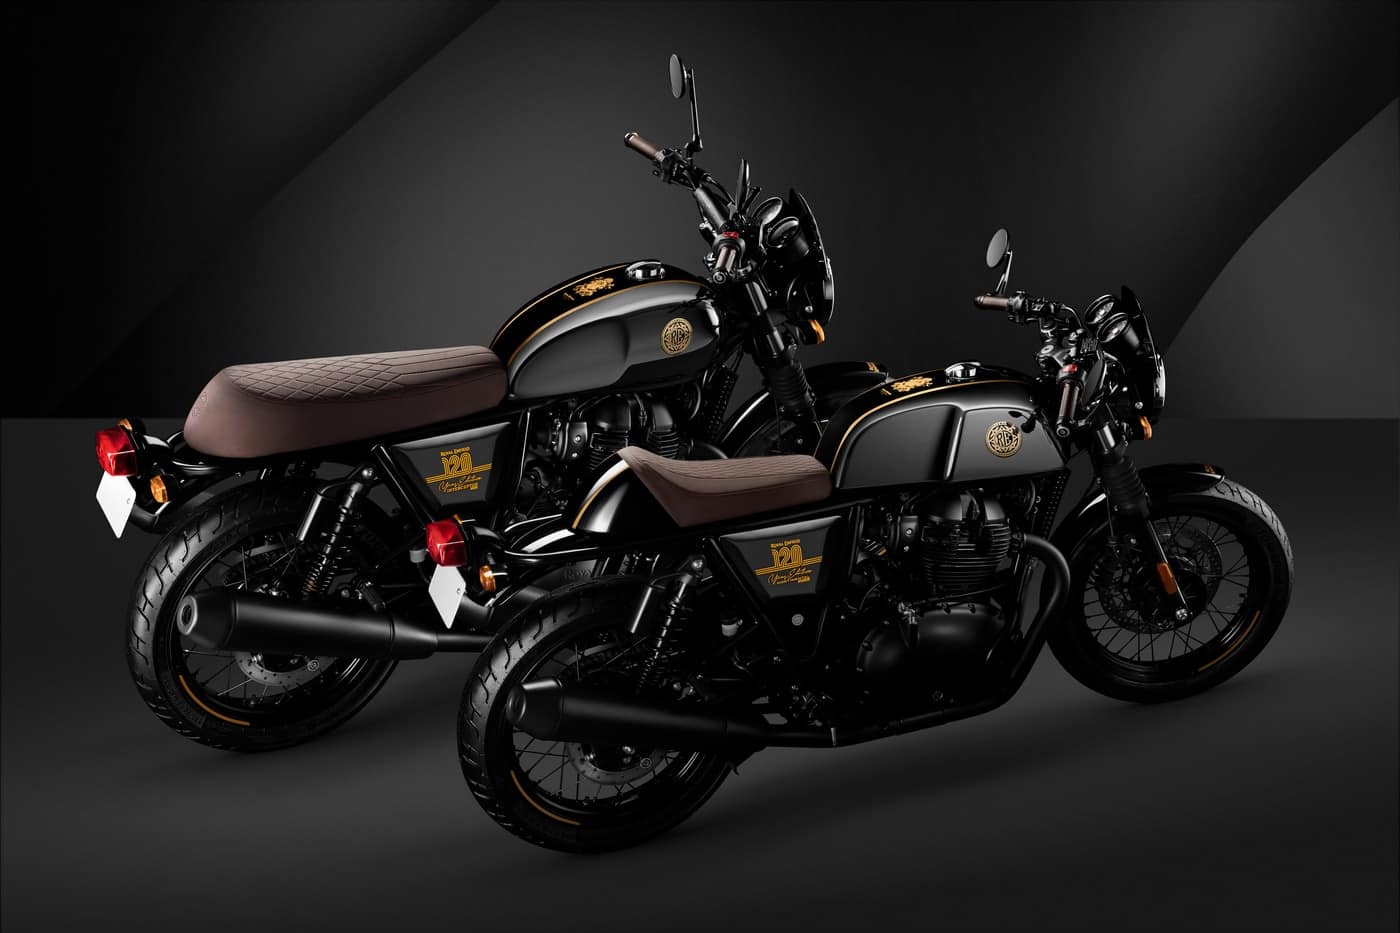 Royal Enfield 650 Twins Limited Edition unveiled at EICMA 2021 to celebrate 120th anniversary Pics